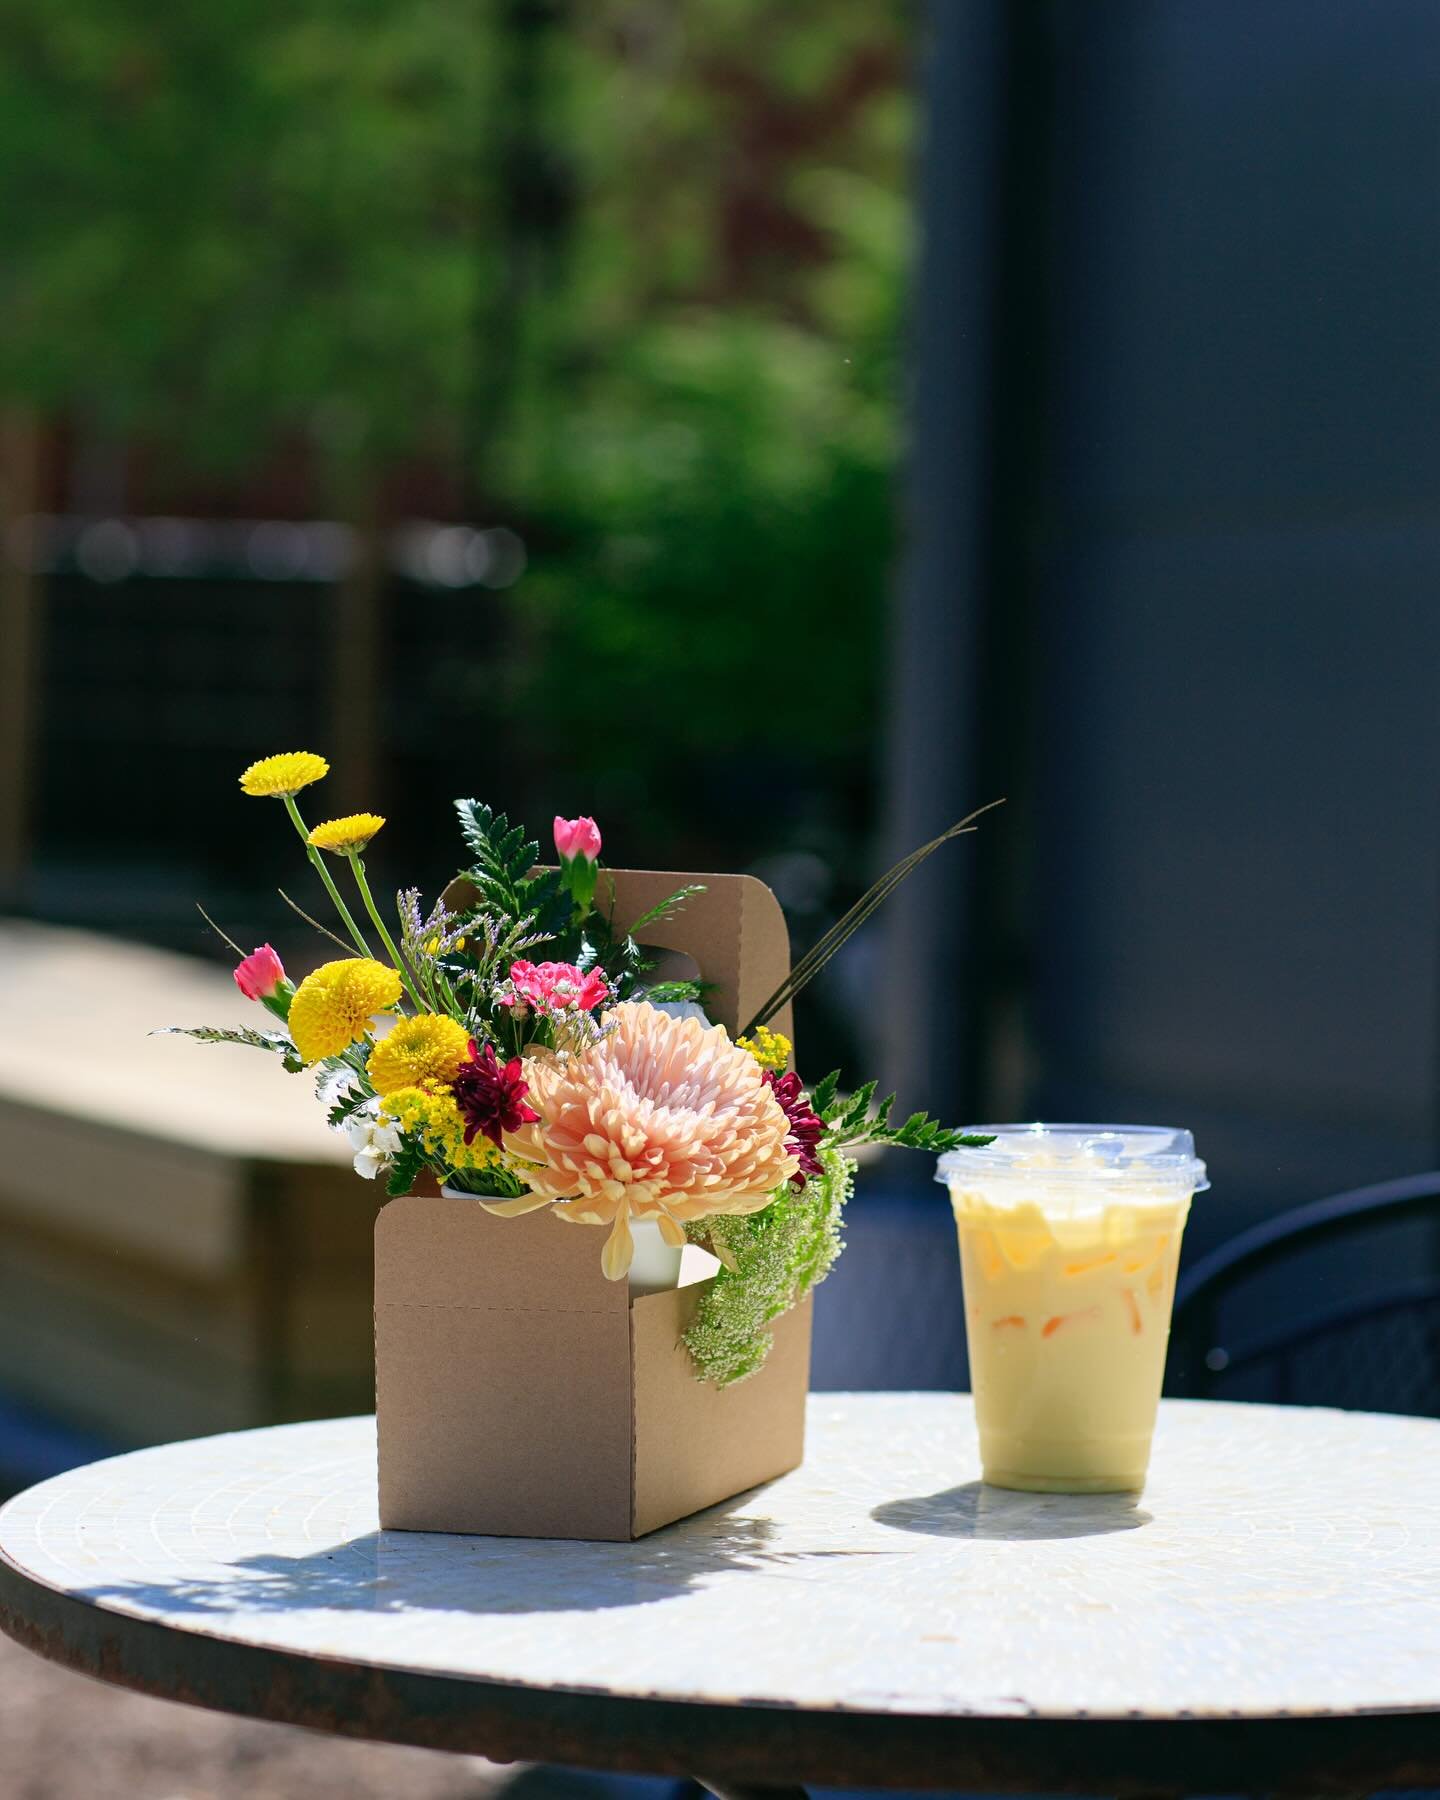 Plan ahead for Mother's Day and pre-order your coffee cup flower arrangements now! 🌼

You can pre-order your Mother's Day coffee cup arrangement at 39thstreetfloral.com and it will be ready for pickup at Fiddlehead Fern Caf&eacute; on Mother's Day&m